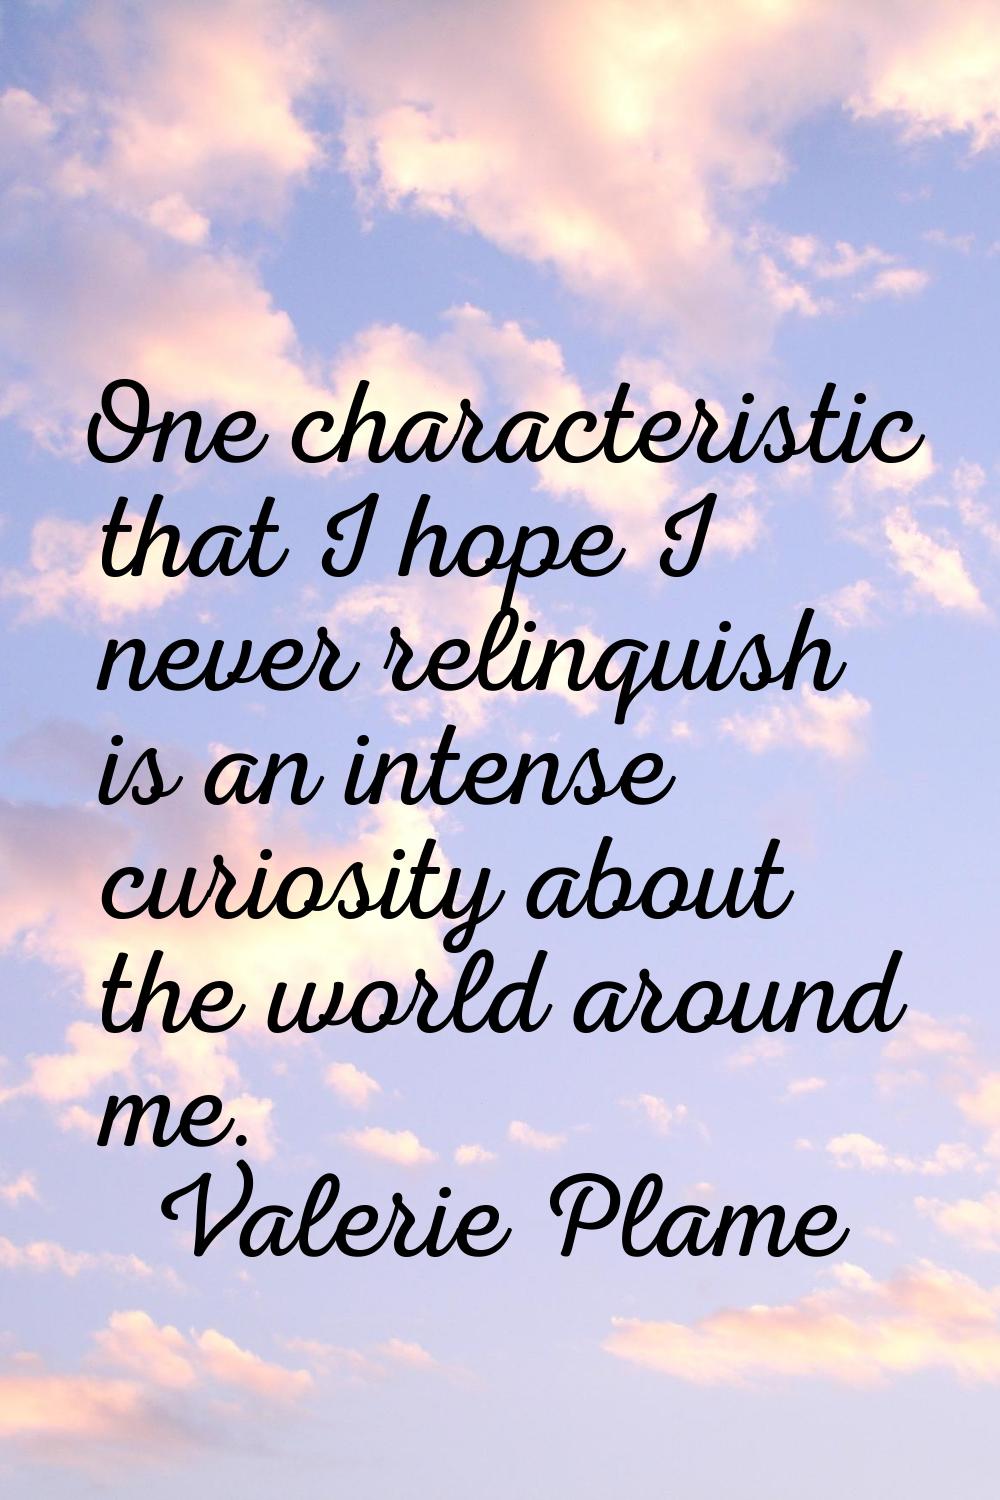 One characteristic that I hope I never relinquish is an intense curiosity about the world around me